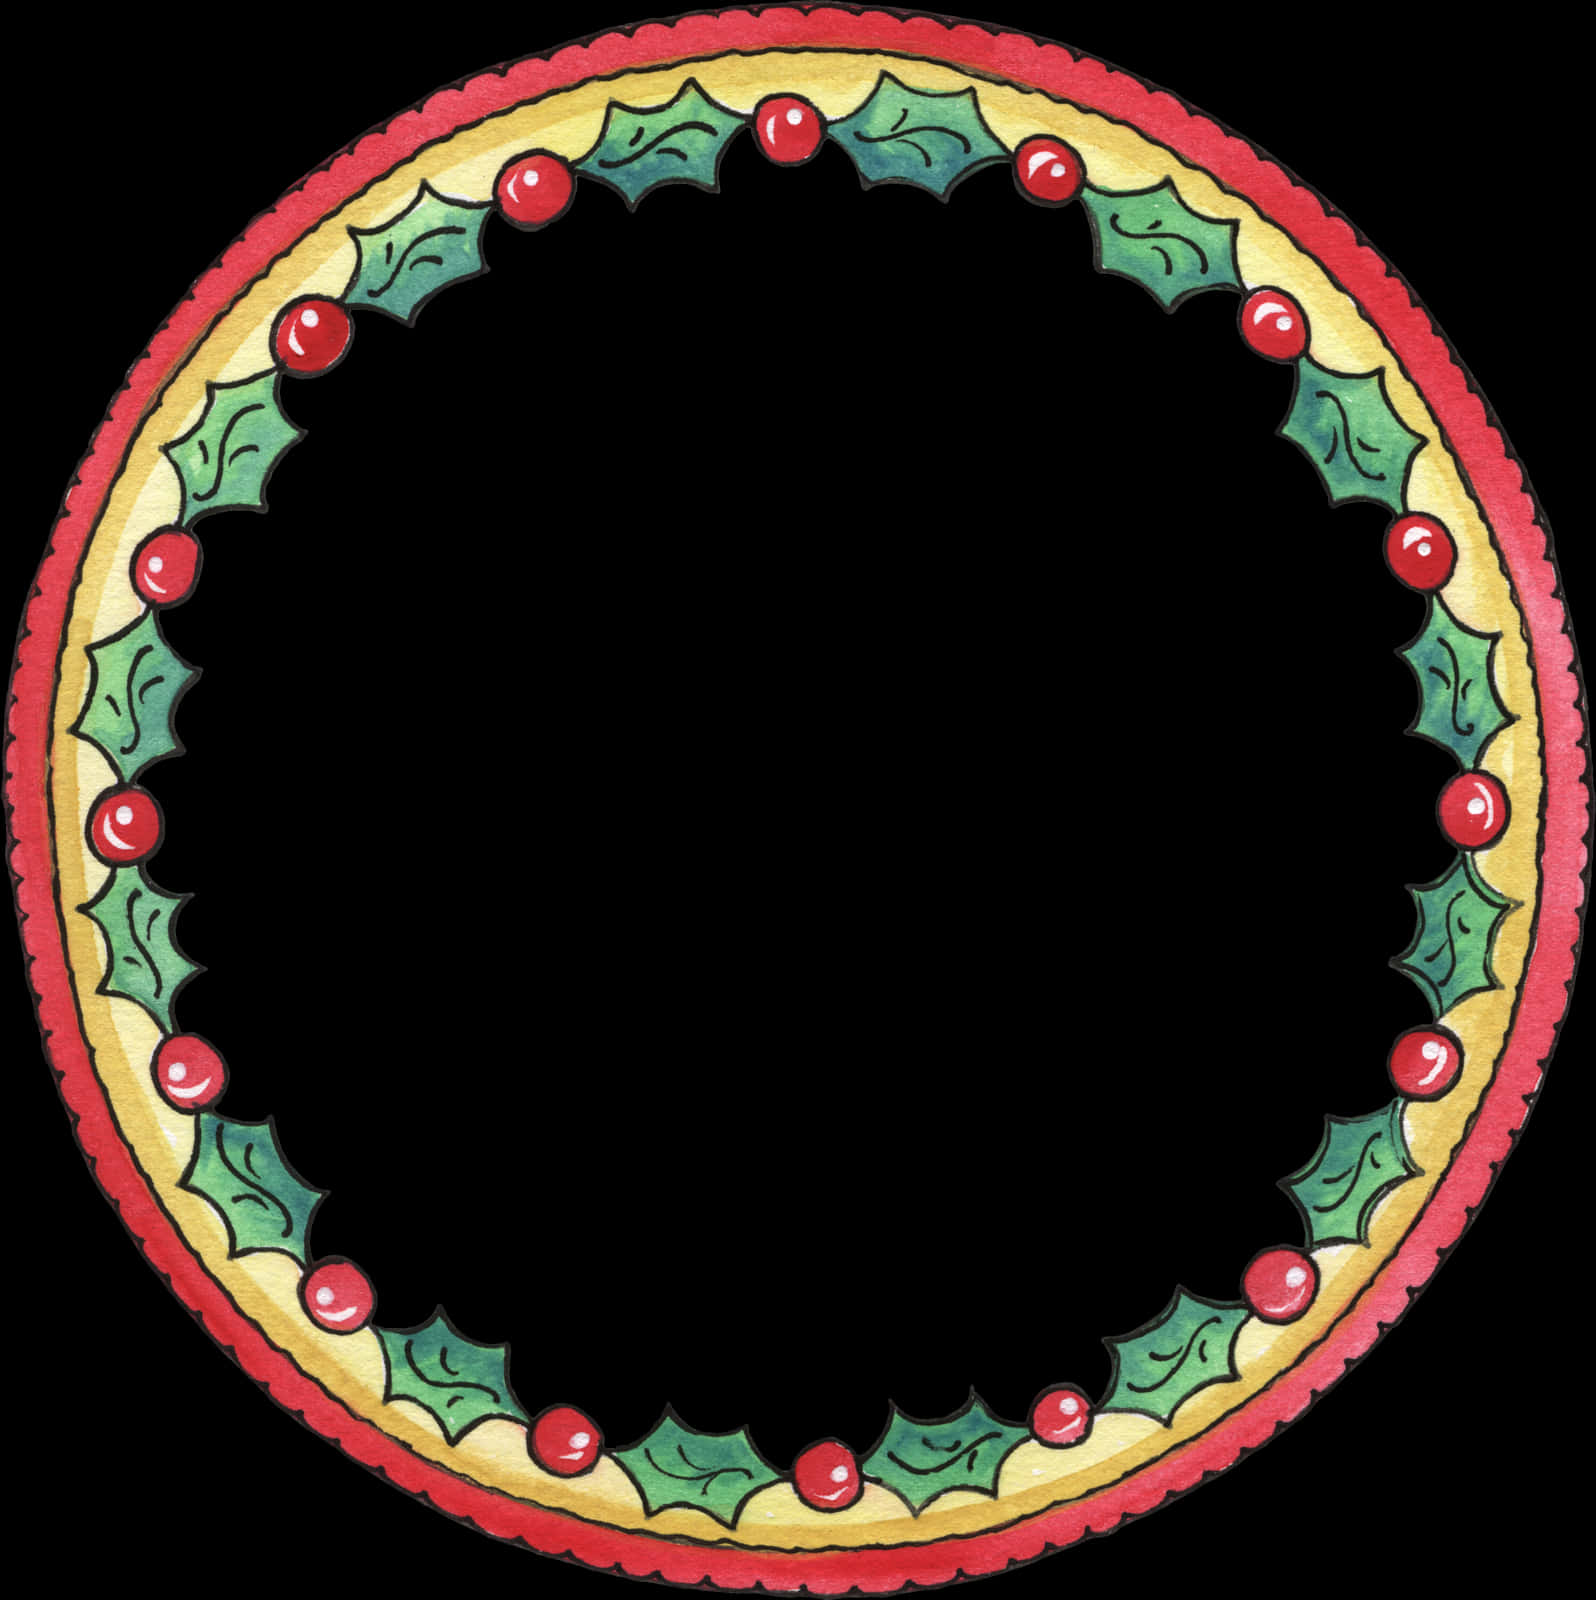 A Circular Frame With Holly Leaves And Berries PNG